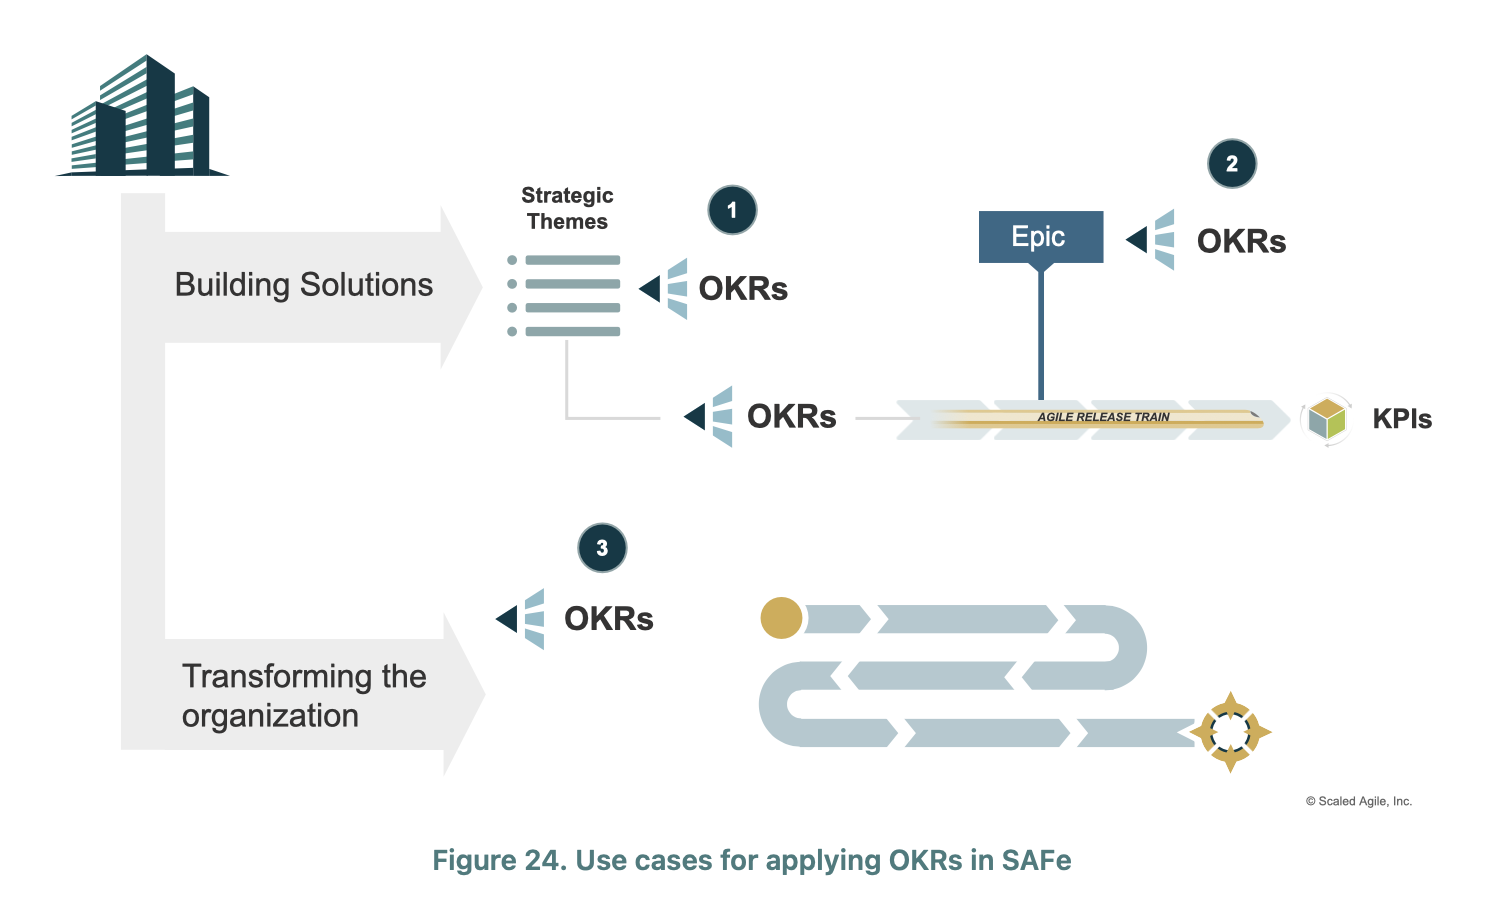 OKRs in SAFe 6.0: Strategic Alignment and Measurable Performance. This image demonstrates how SAFe 6.0 incorporates OKRs to strengthen coherence and efficiency within agile organizations.